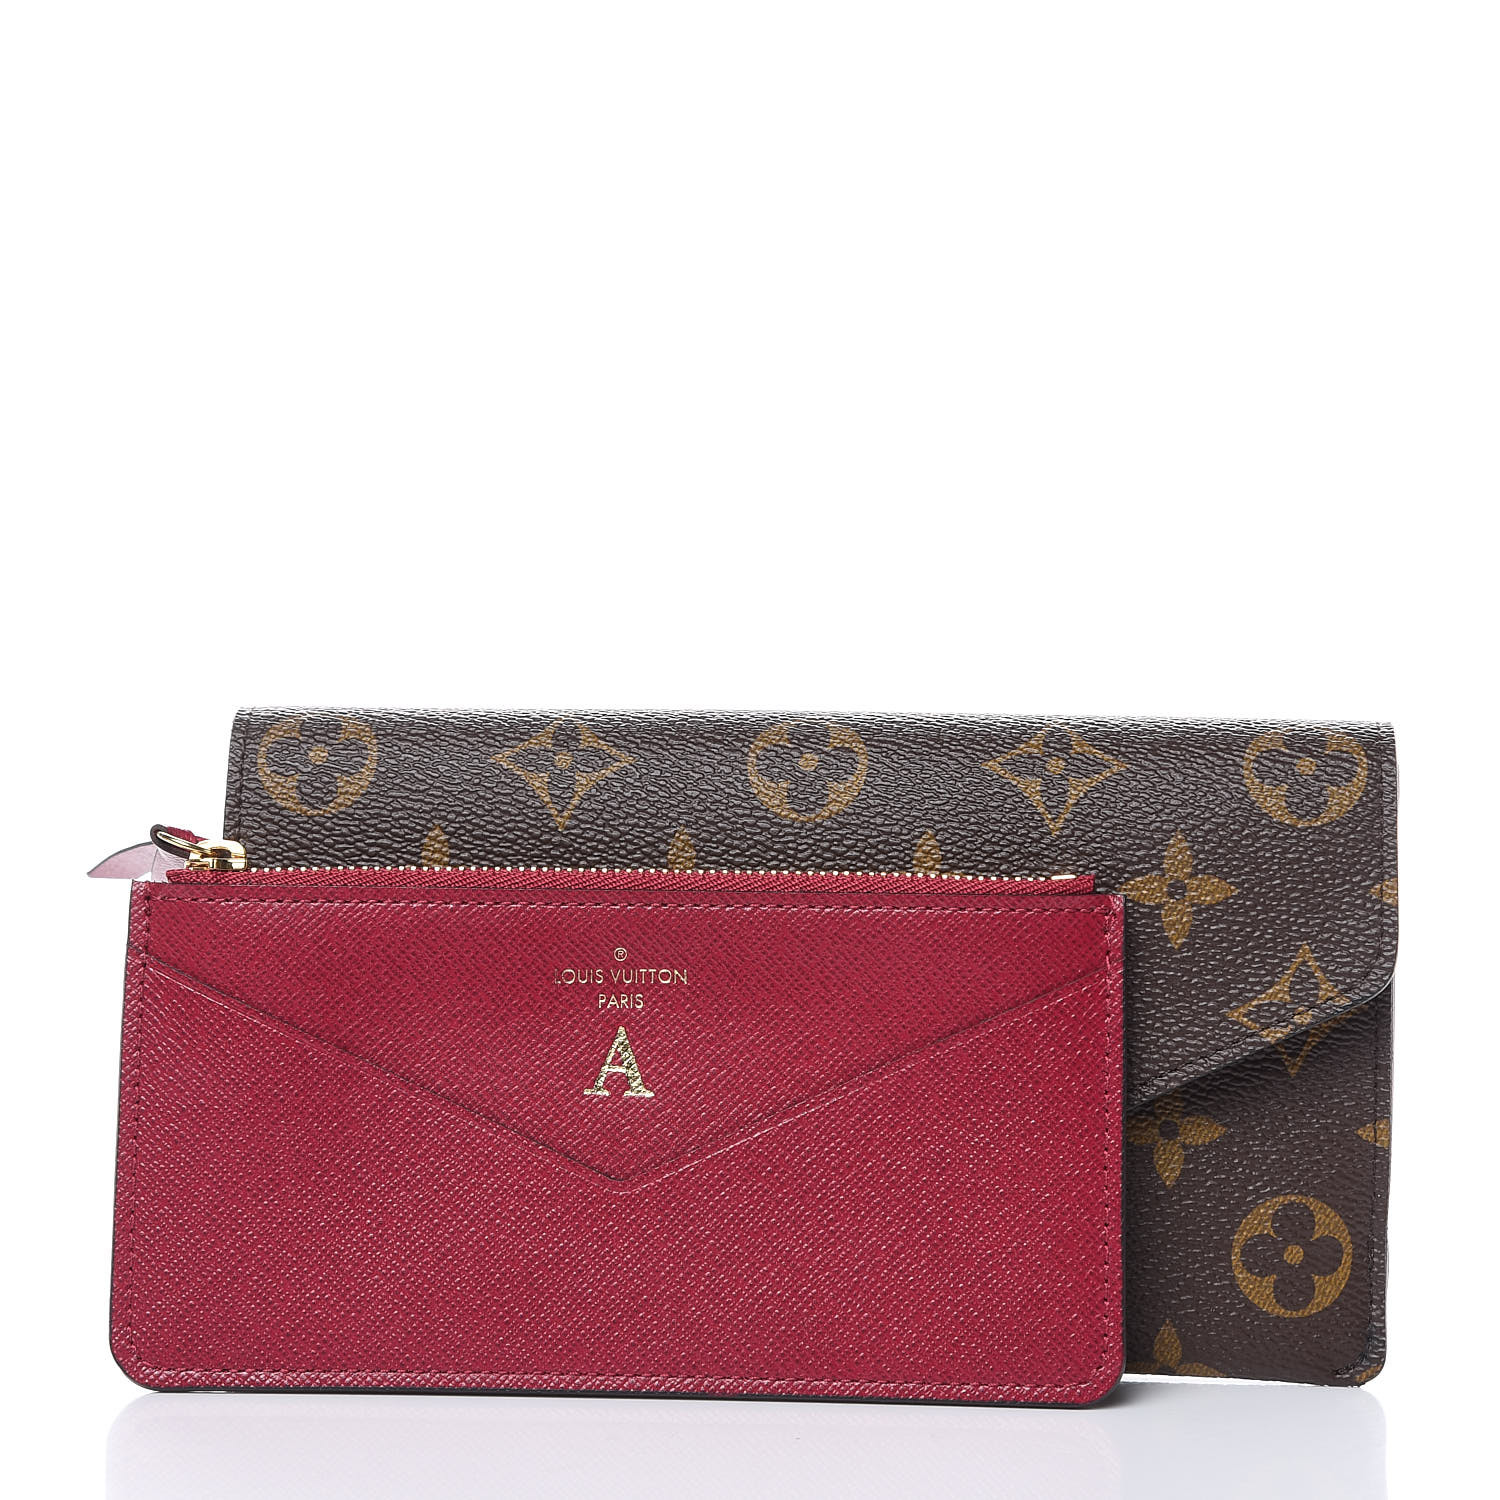 Hi all! I've owned a Victorine wallet for a few years now and want